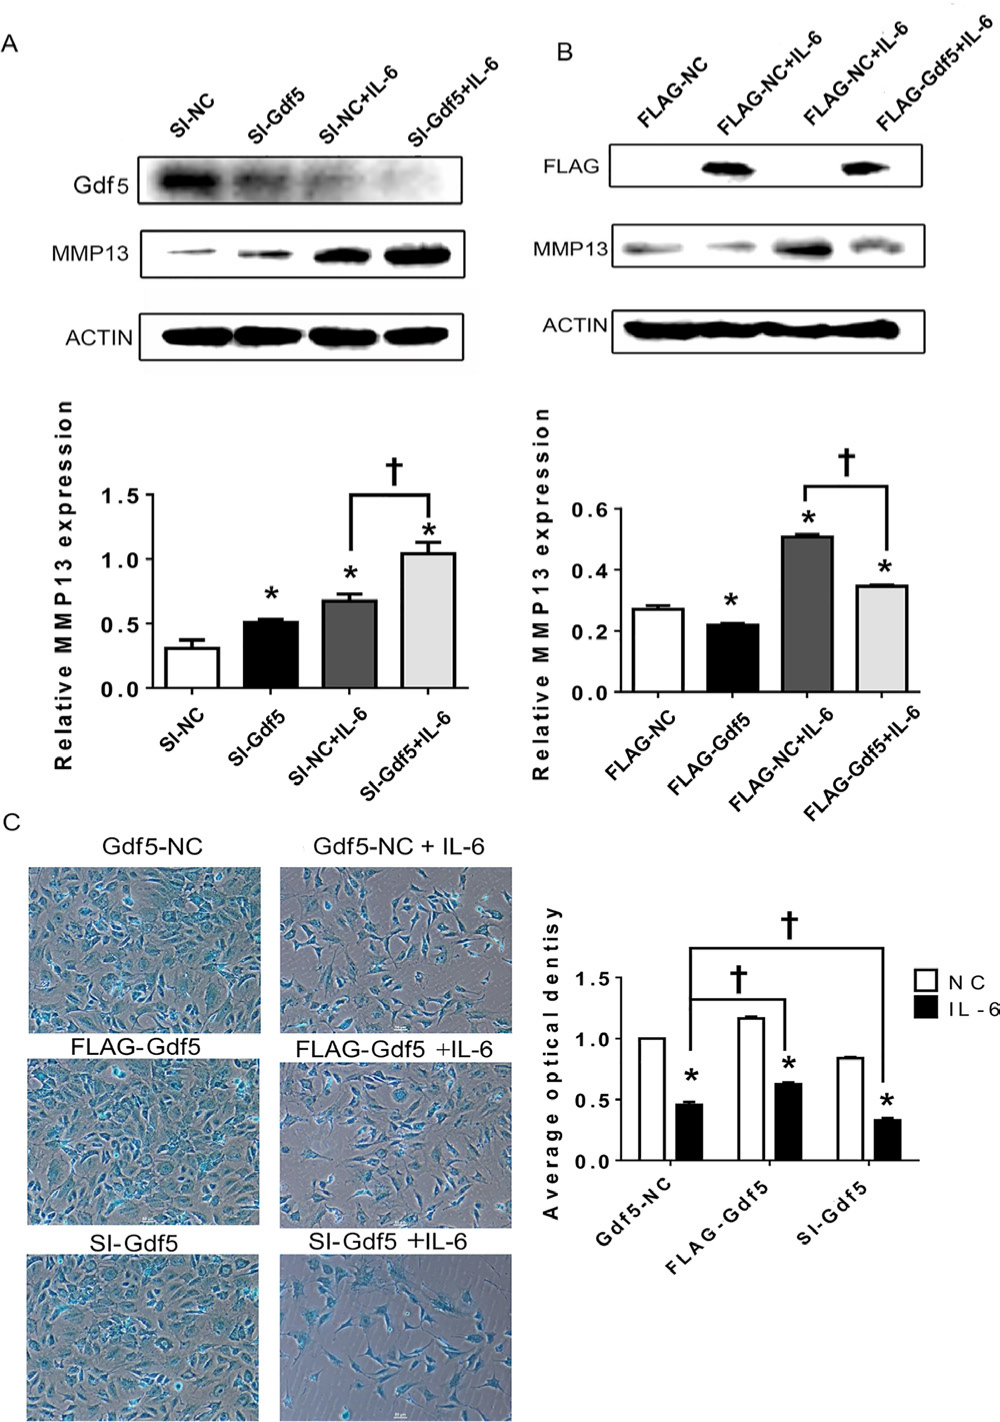 Fig. 7 
            Growth differentiation factor 5 (Gdf5) stimulation decreases matrix metalloproteinase 13 (MMP13) expression and extracellular matrix (ECM) production by mandibular condylar chondrocytes (MCCs). a) and b) Protein levels of MMP13 in chondrocytes transfected with Gdf5 siRNA (si-Gdf5) or flag-Gdf5 and their corresponding negative control constructs with or without interleukin-6 (IL-6) stimulation. c) Images (magnification: 100×) of alcian blue staining and calculation of the corresponding average optical density (AOD) values in MCCs transfected with si-Gdf5 or flag-Gdf5 with or without IL-6 stimulation. The data are presented as the means ± SDs (n = 3). One-way analysis of variance (ANOVA) with Tukey’s post hoc test was used to identify significant differences in multiple comparisons. The asterisk (*) and dagger symbols (†) indicate p-values of < 0.05. *Comparing between NC and other groups; †comparing between Gdf5-NC (SI-NC or FLAG-NC)+IL-6 group and FLAG-Gdf5+IL-6 or SI-Gdf5+IL-6 group. NC, control.
          